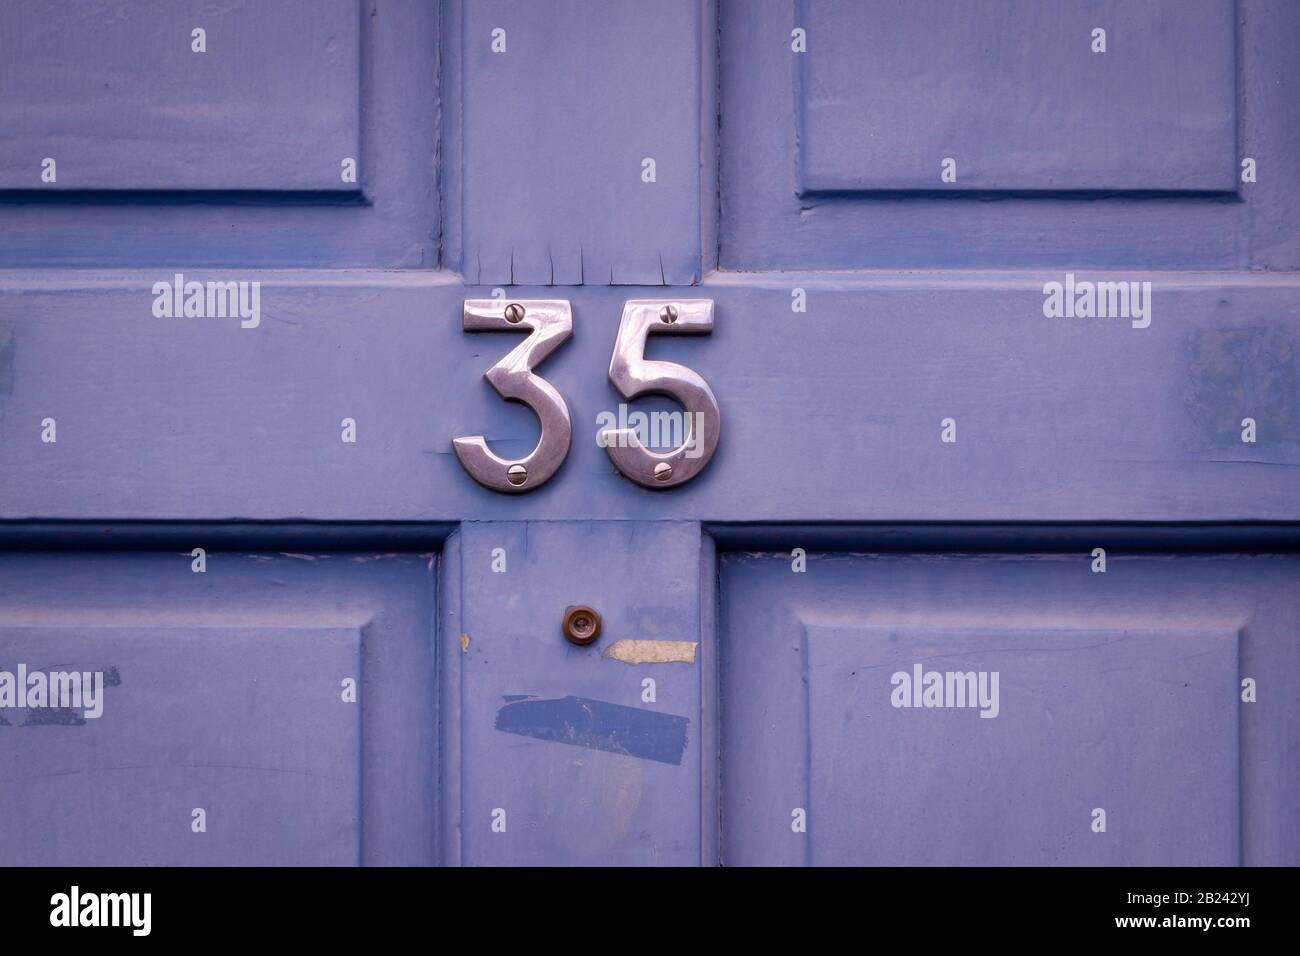 House number 35 Stock Photo